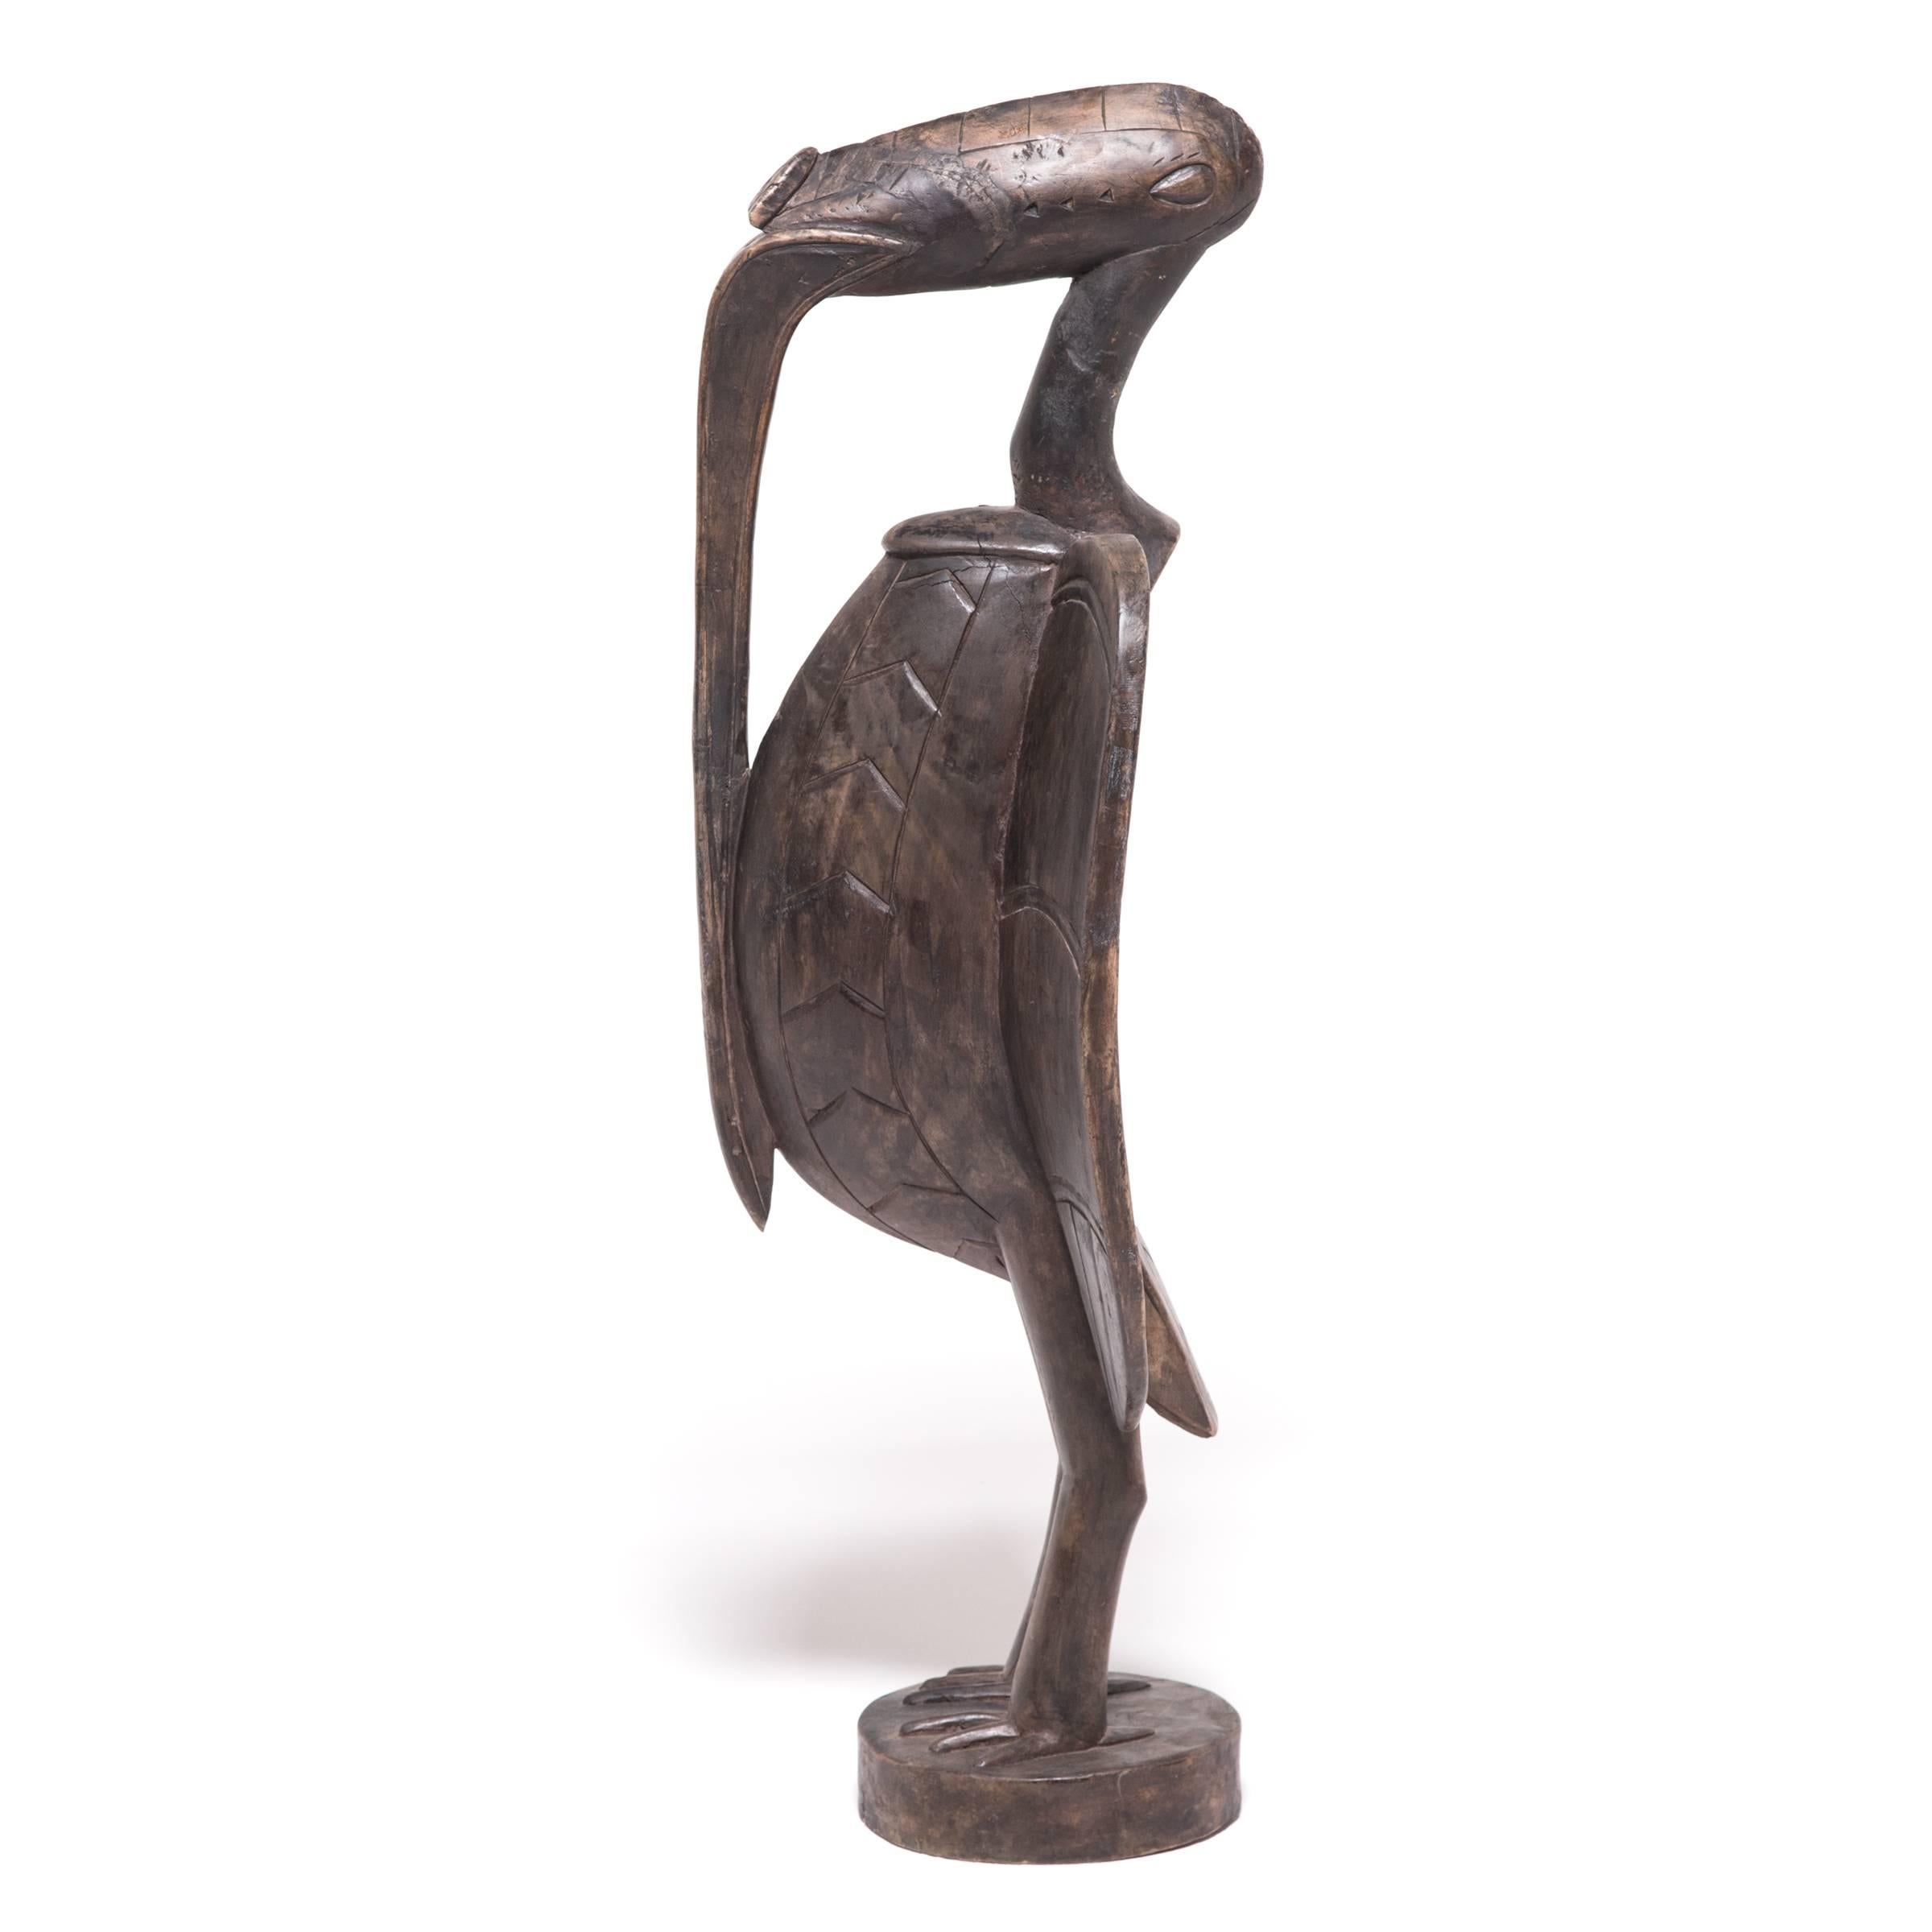 This striking bird figure may have once been kept in a sacred grove, protecting the initiated male members of a Senufo society. Likely modeled after the yellow-casqued hornbill, this sculpture exaggerates the bird’s form with outstretched wings, a